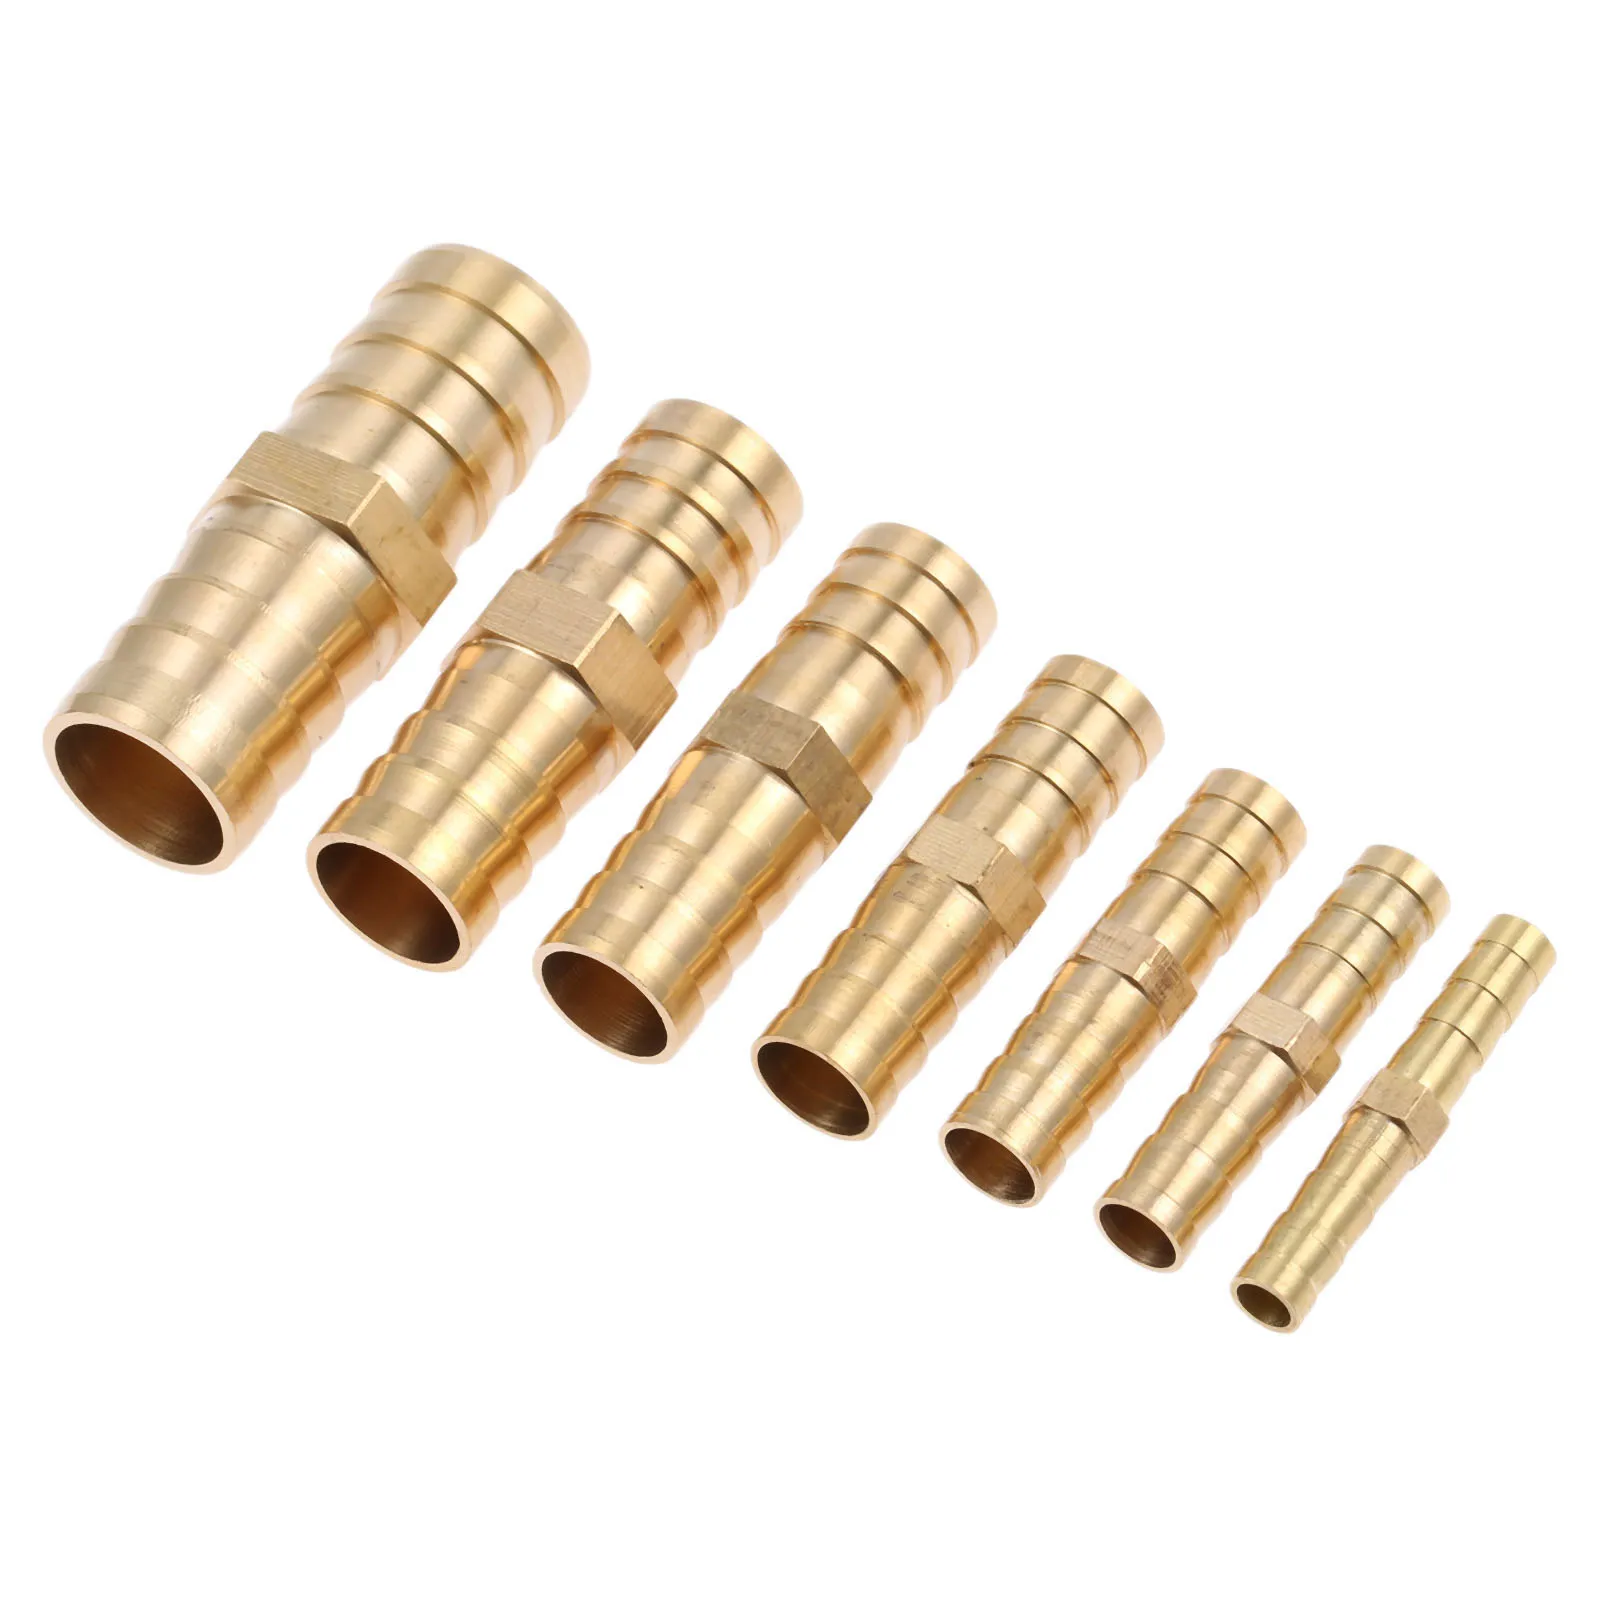 Brass Perforation Straight Hose Joiner Barbed Connector Fuel Water Gas Tubing 